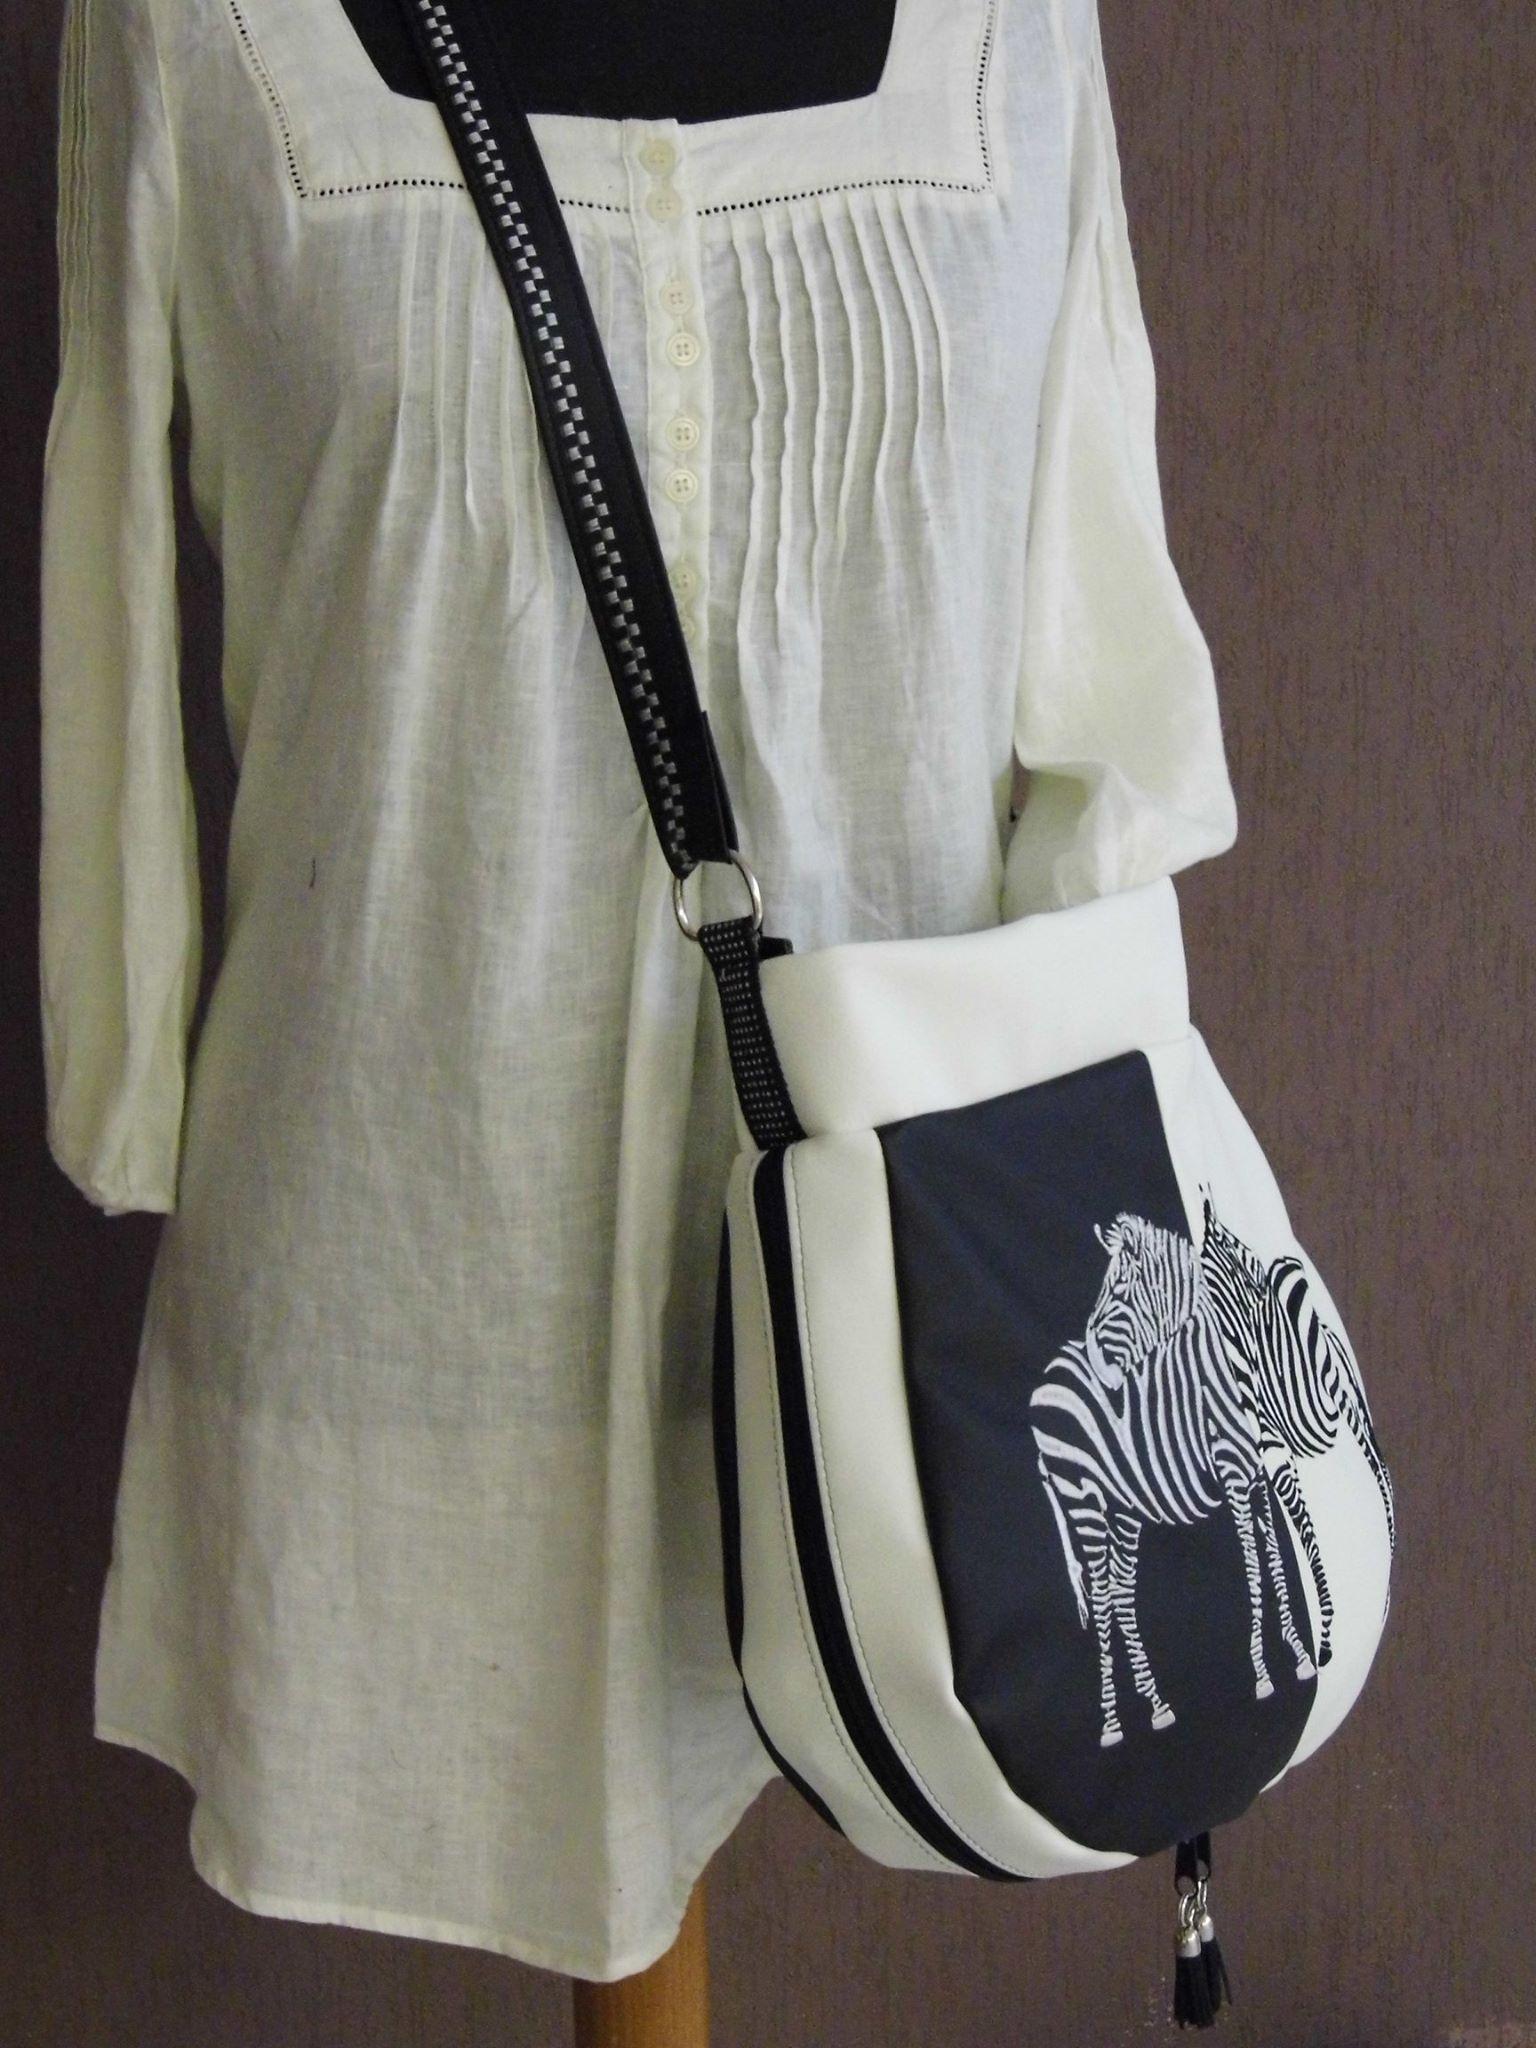 Embroidered women's bag with two zebras free design